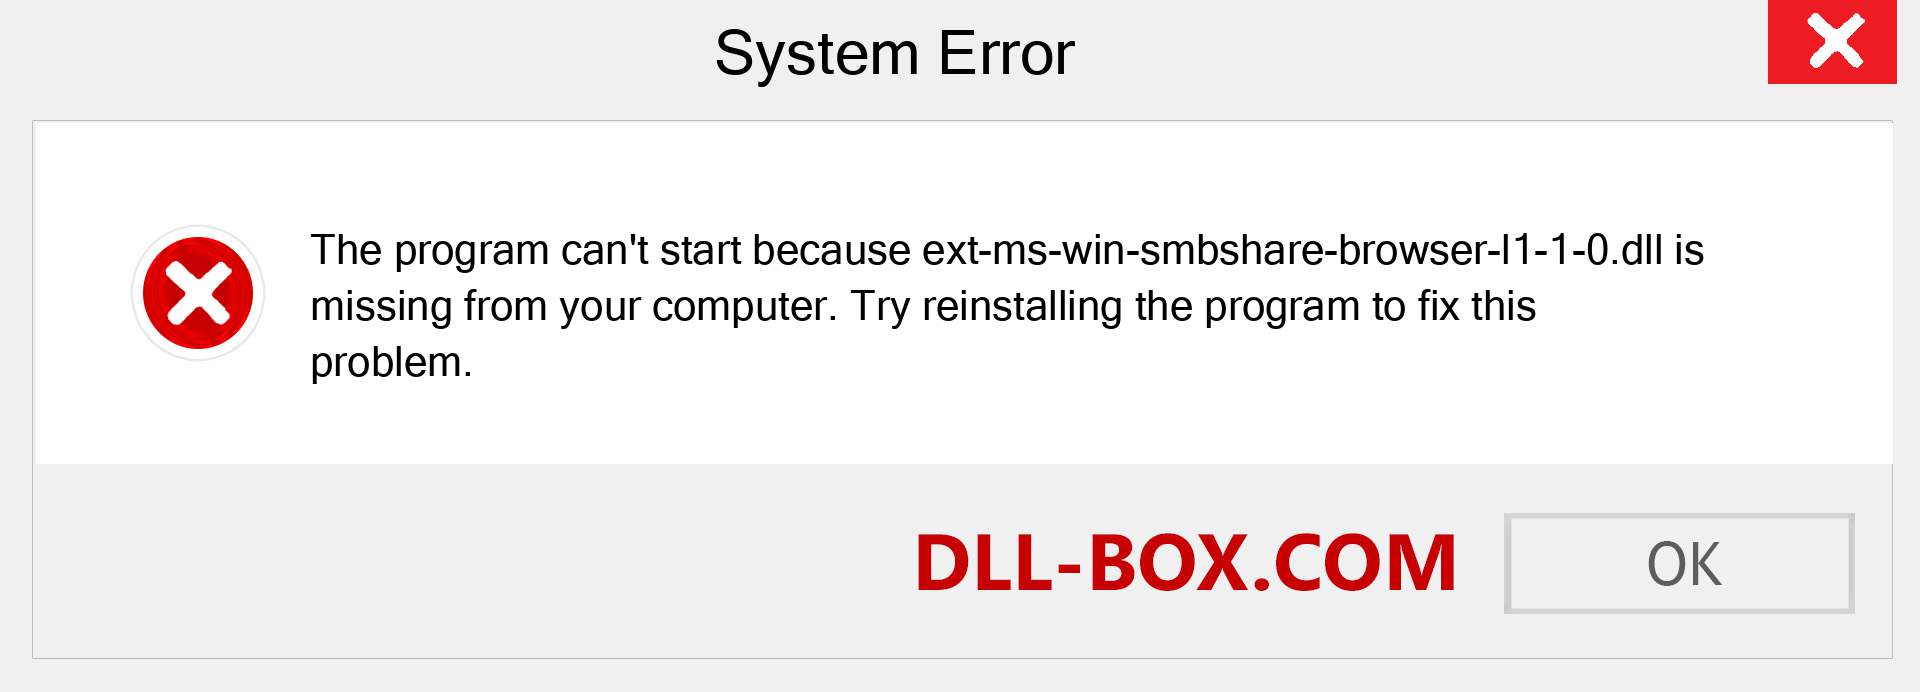  ext-ms-win-smbshare-browser-l1-1-0.dll file is missing?. Download for Windows 7, 8, 10 - Fix  ext-ms-win-smbshare-browser-l1-1-0 dll Missing Error on Windows, photos, images